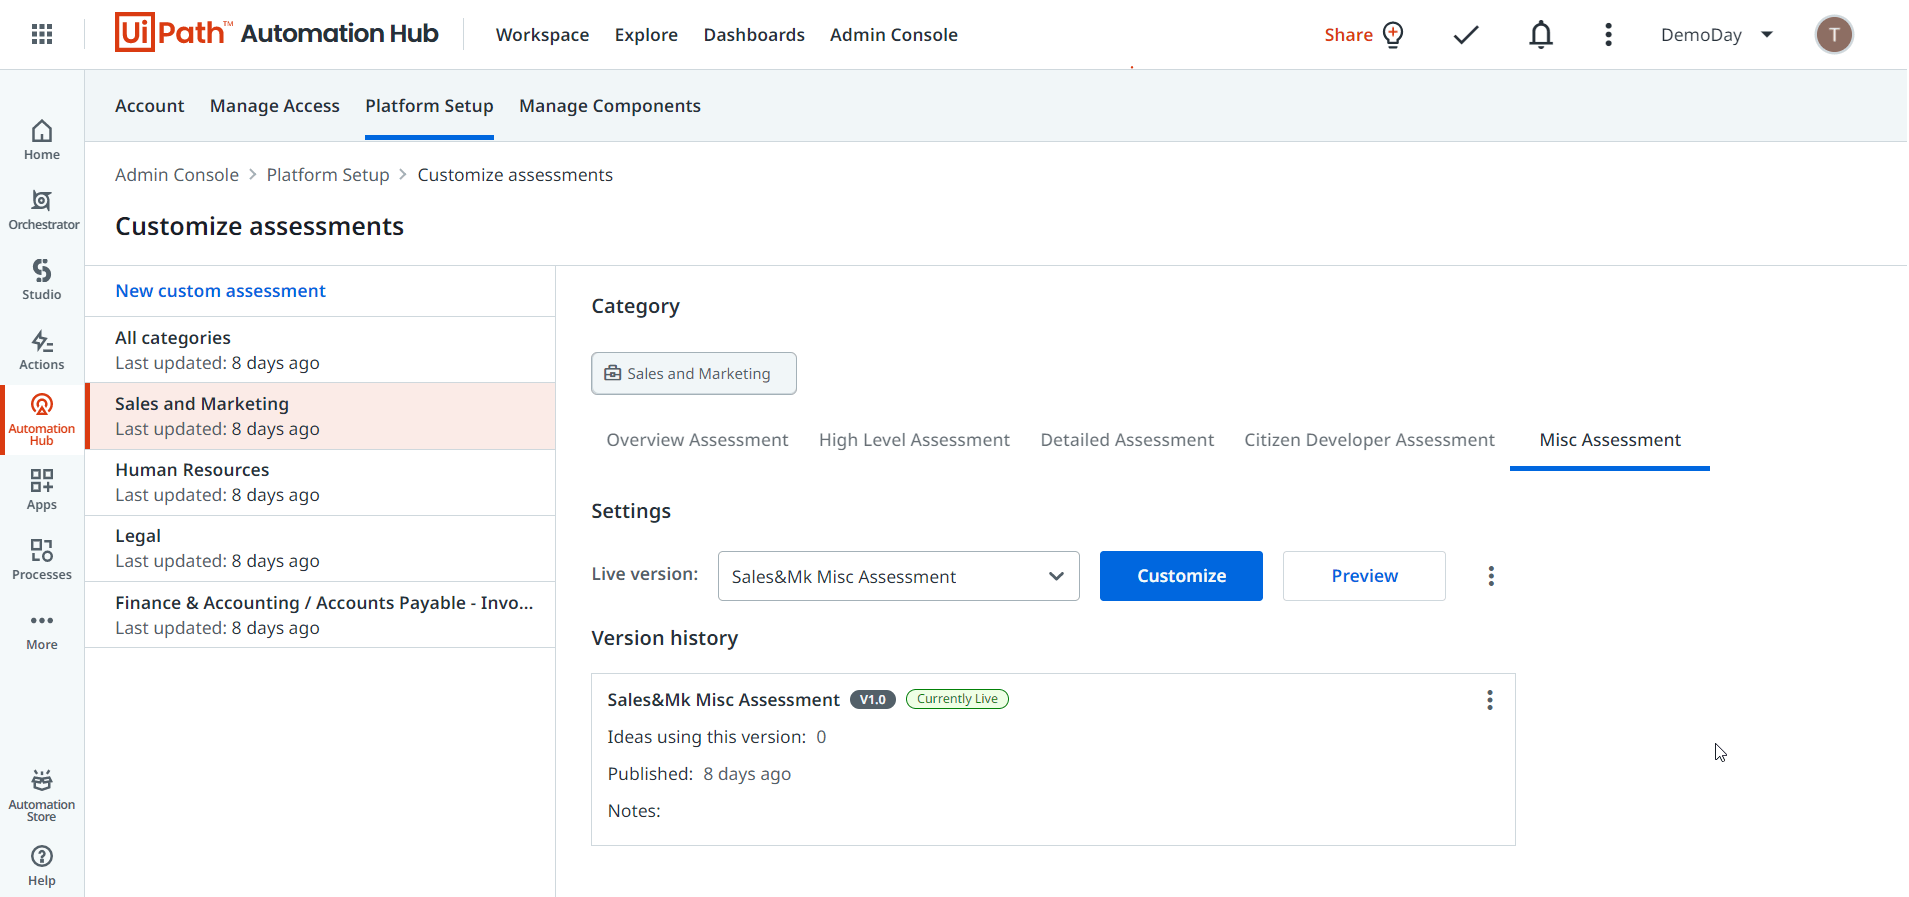 customize assessments uipath automation hub 2022.4 release